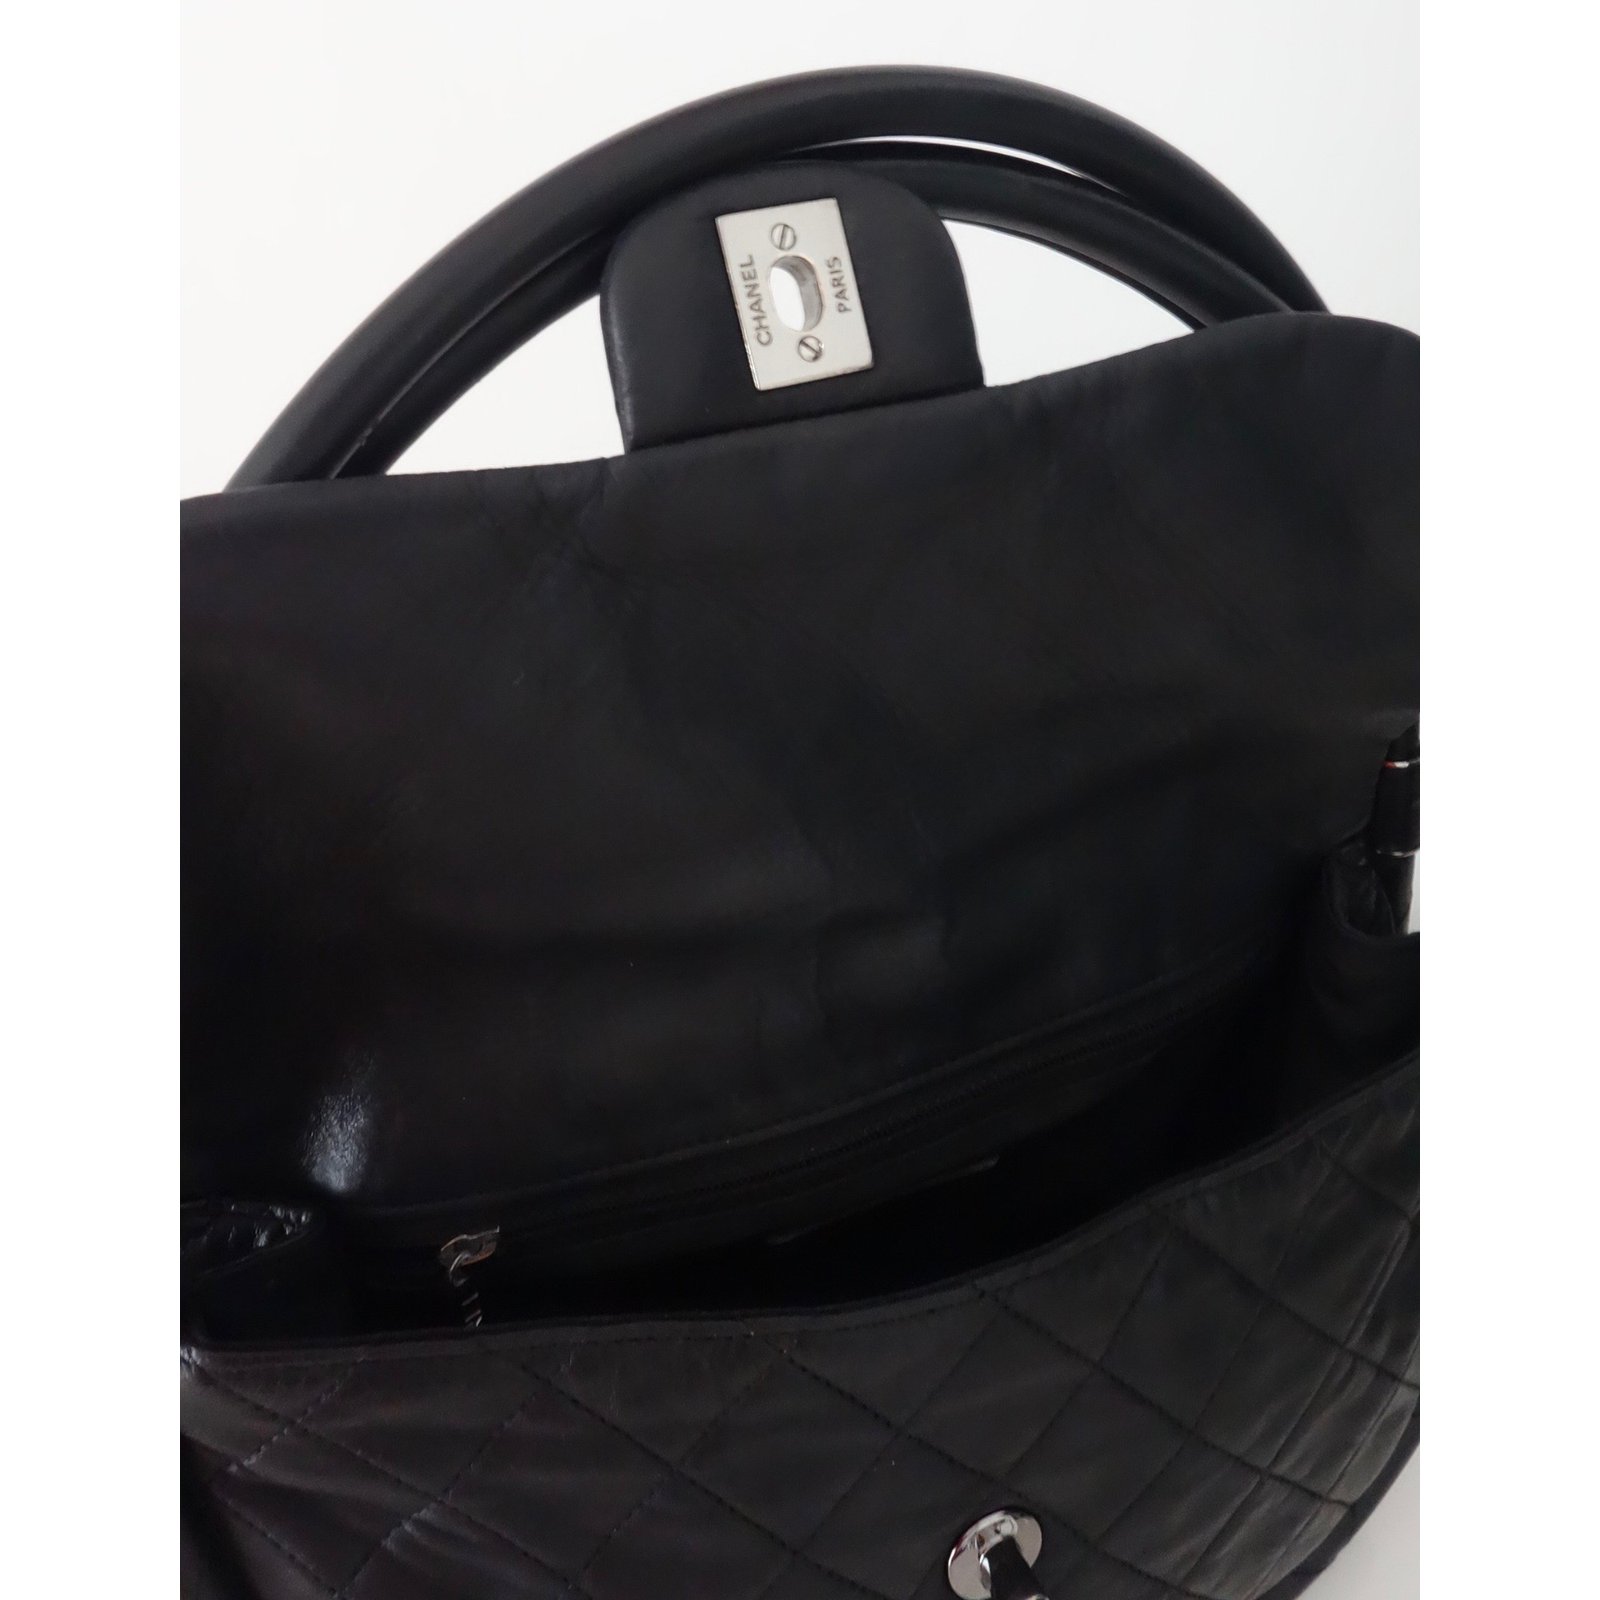 Chanel - Authenticated Hula Hoop Handbag - Leather Black Plain for Women, Very Good Condition